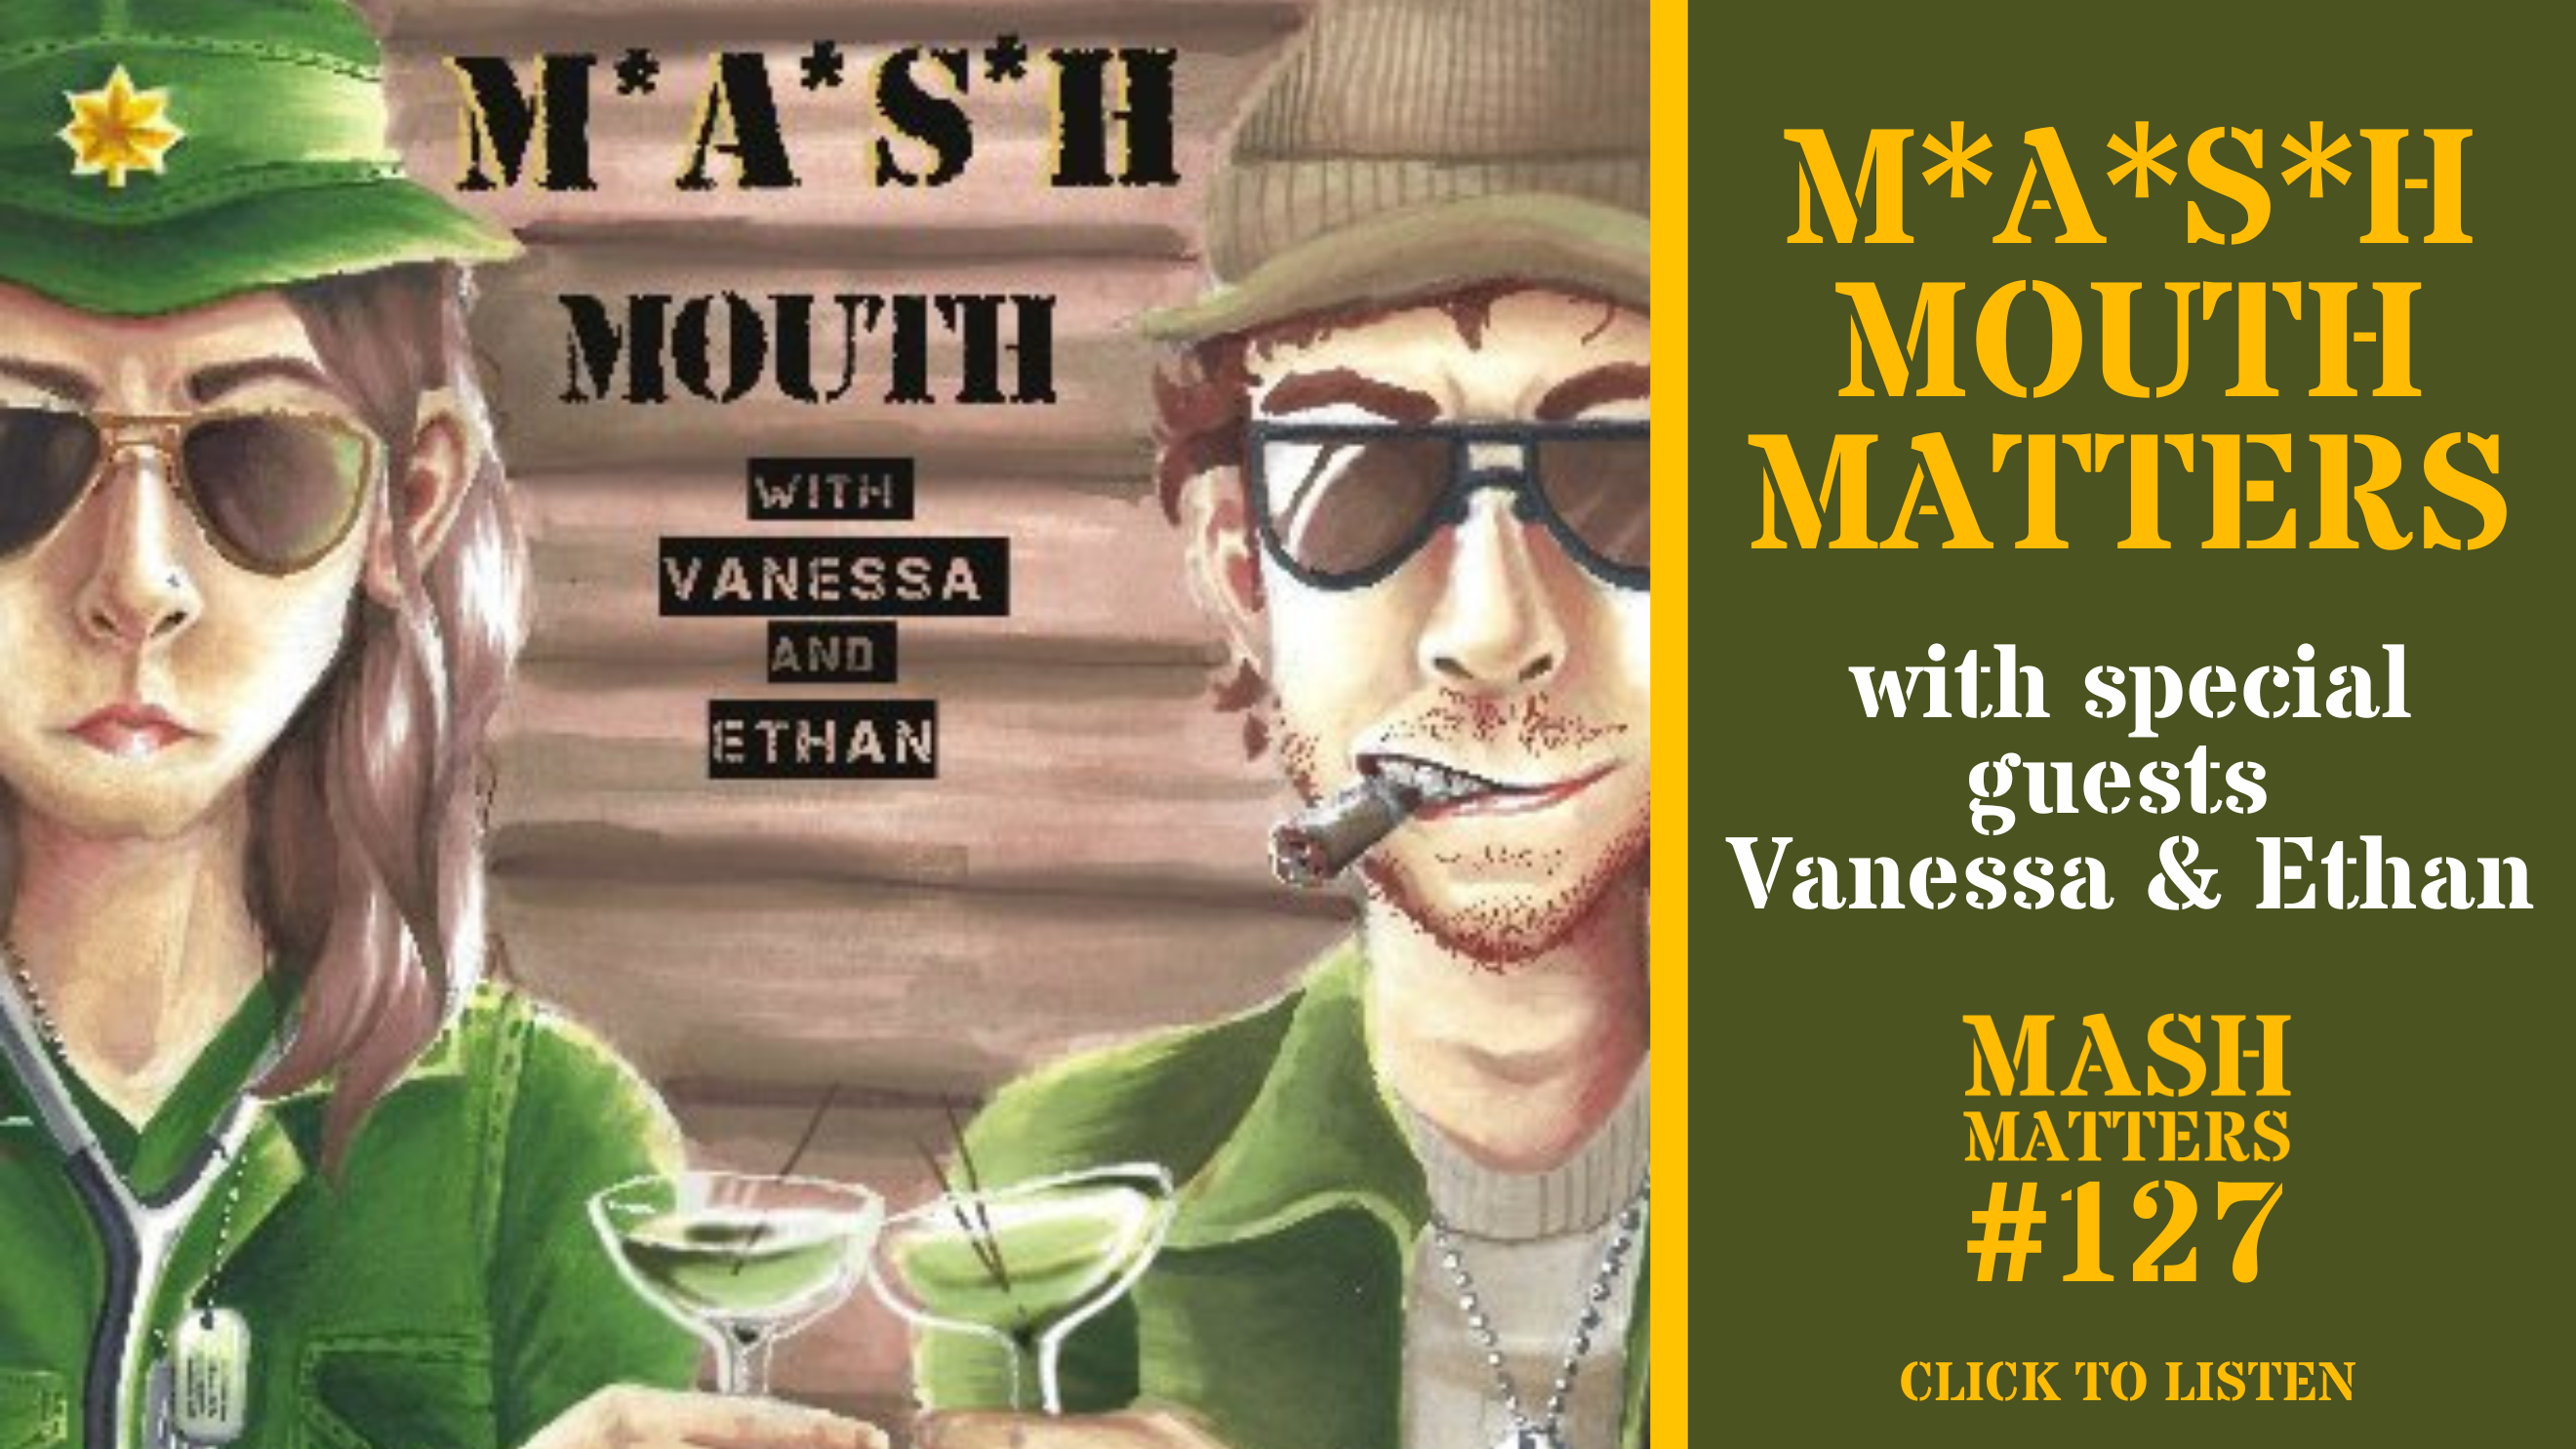 Episode #127 titled ‘MASH Mouth Matters’ with special guests Vanessa & Ethan. Click to listen.